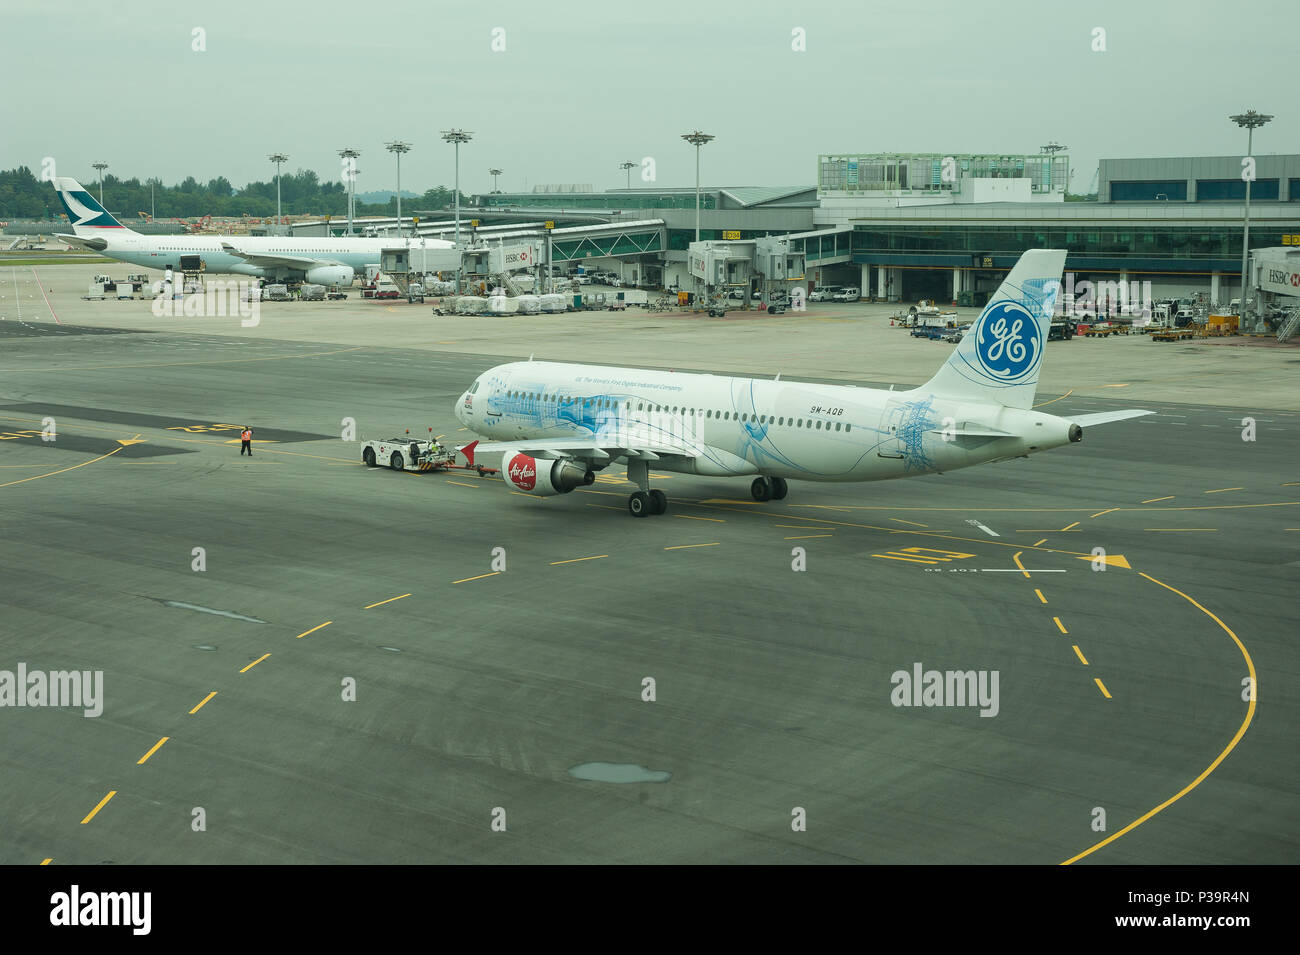 Singapore, Republic of Singapore, aircraft on the apron of the Singapore airport Stock Photo